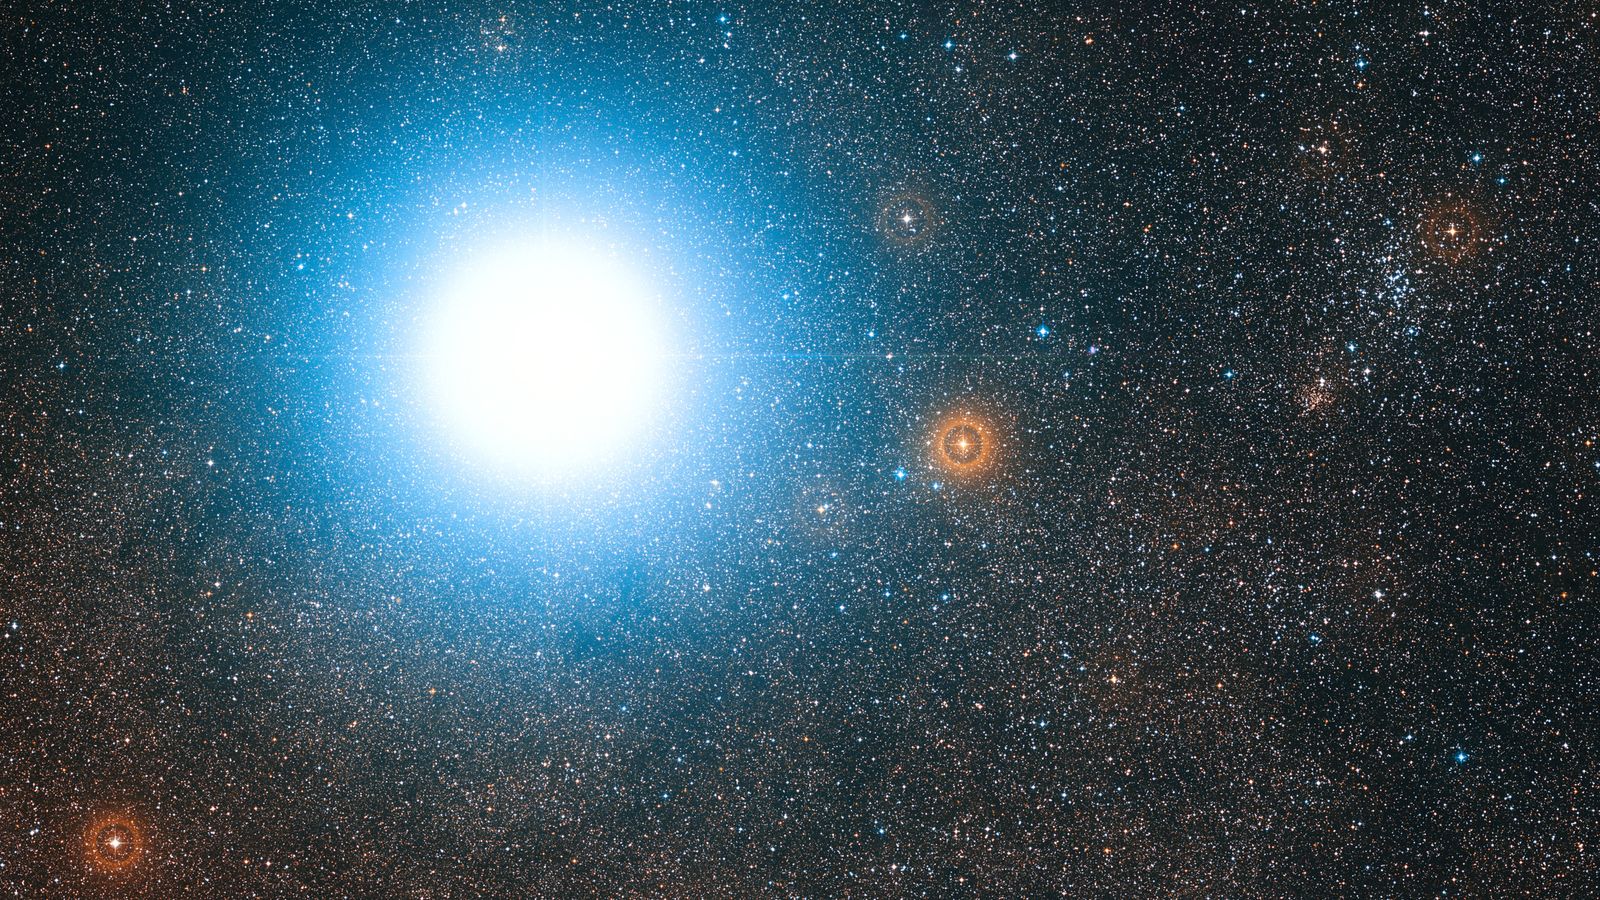 Alpha Centauri may have another exoplanet